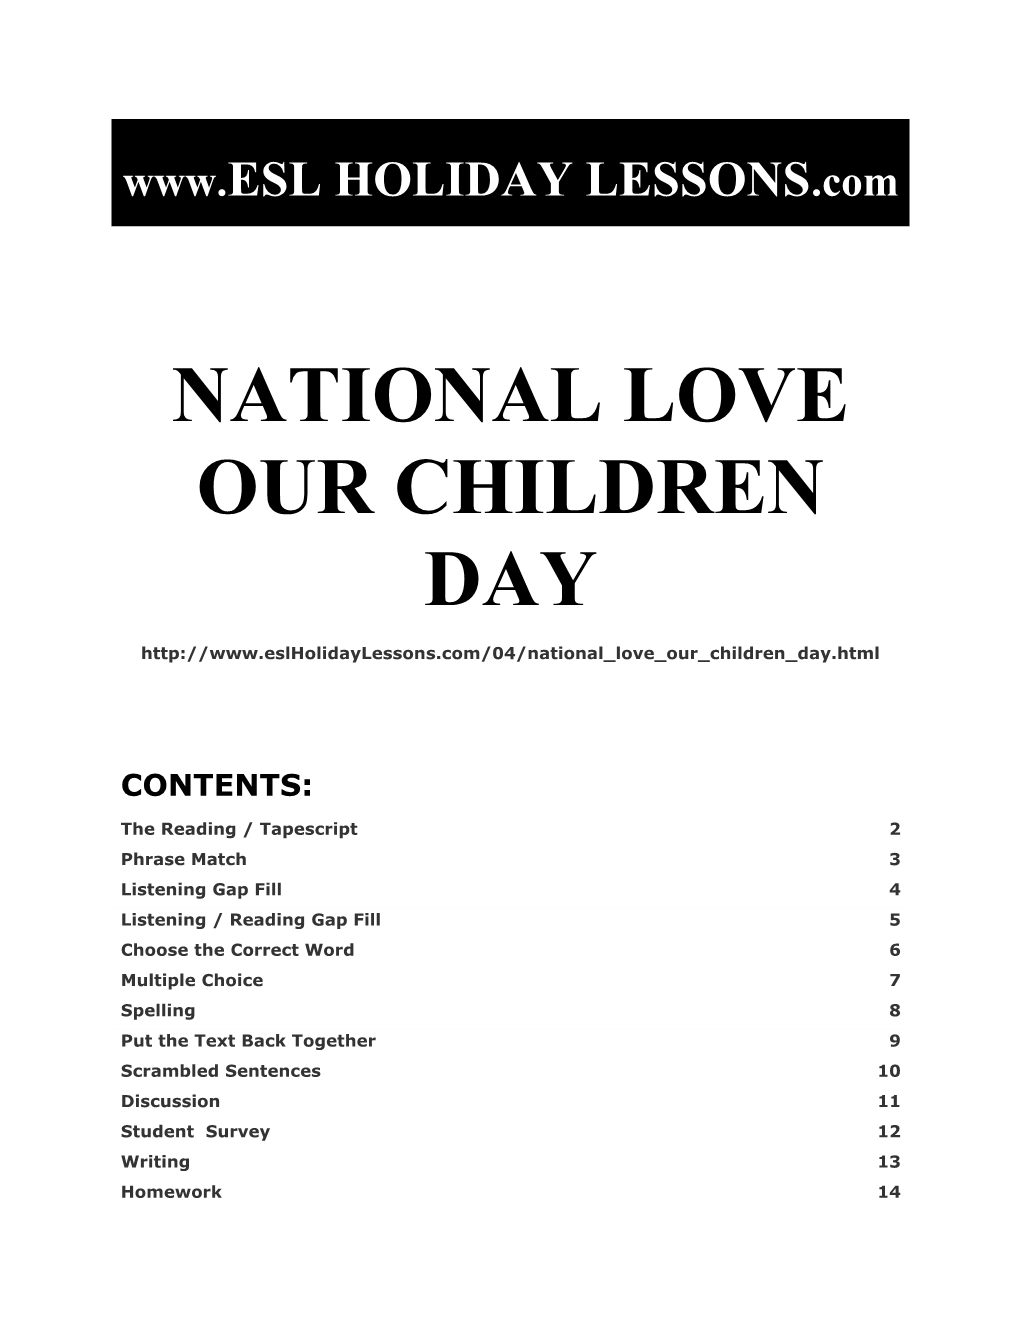 Holiday Lessons - National Love Our Children Day